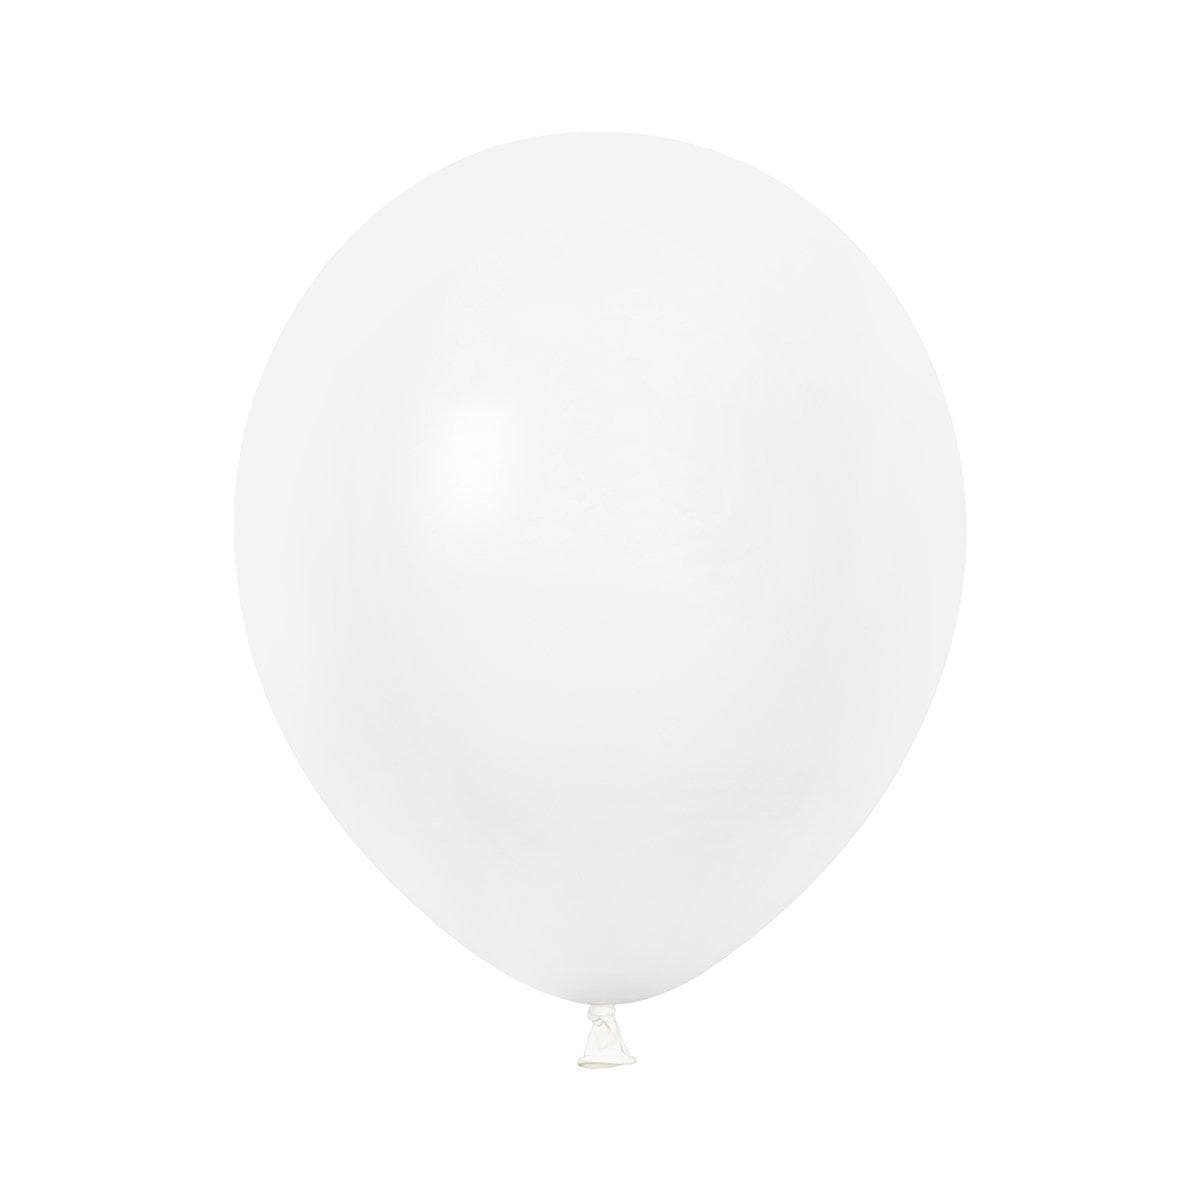 Buy balloons White Latex Balloon 5 Inches, 100 Count sold at Party Expert